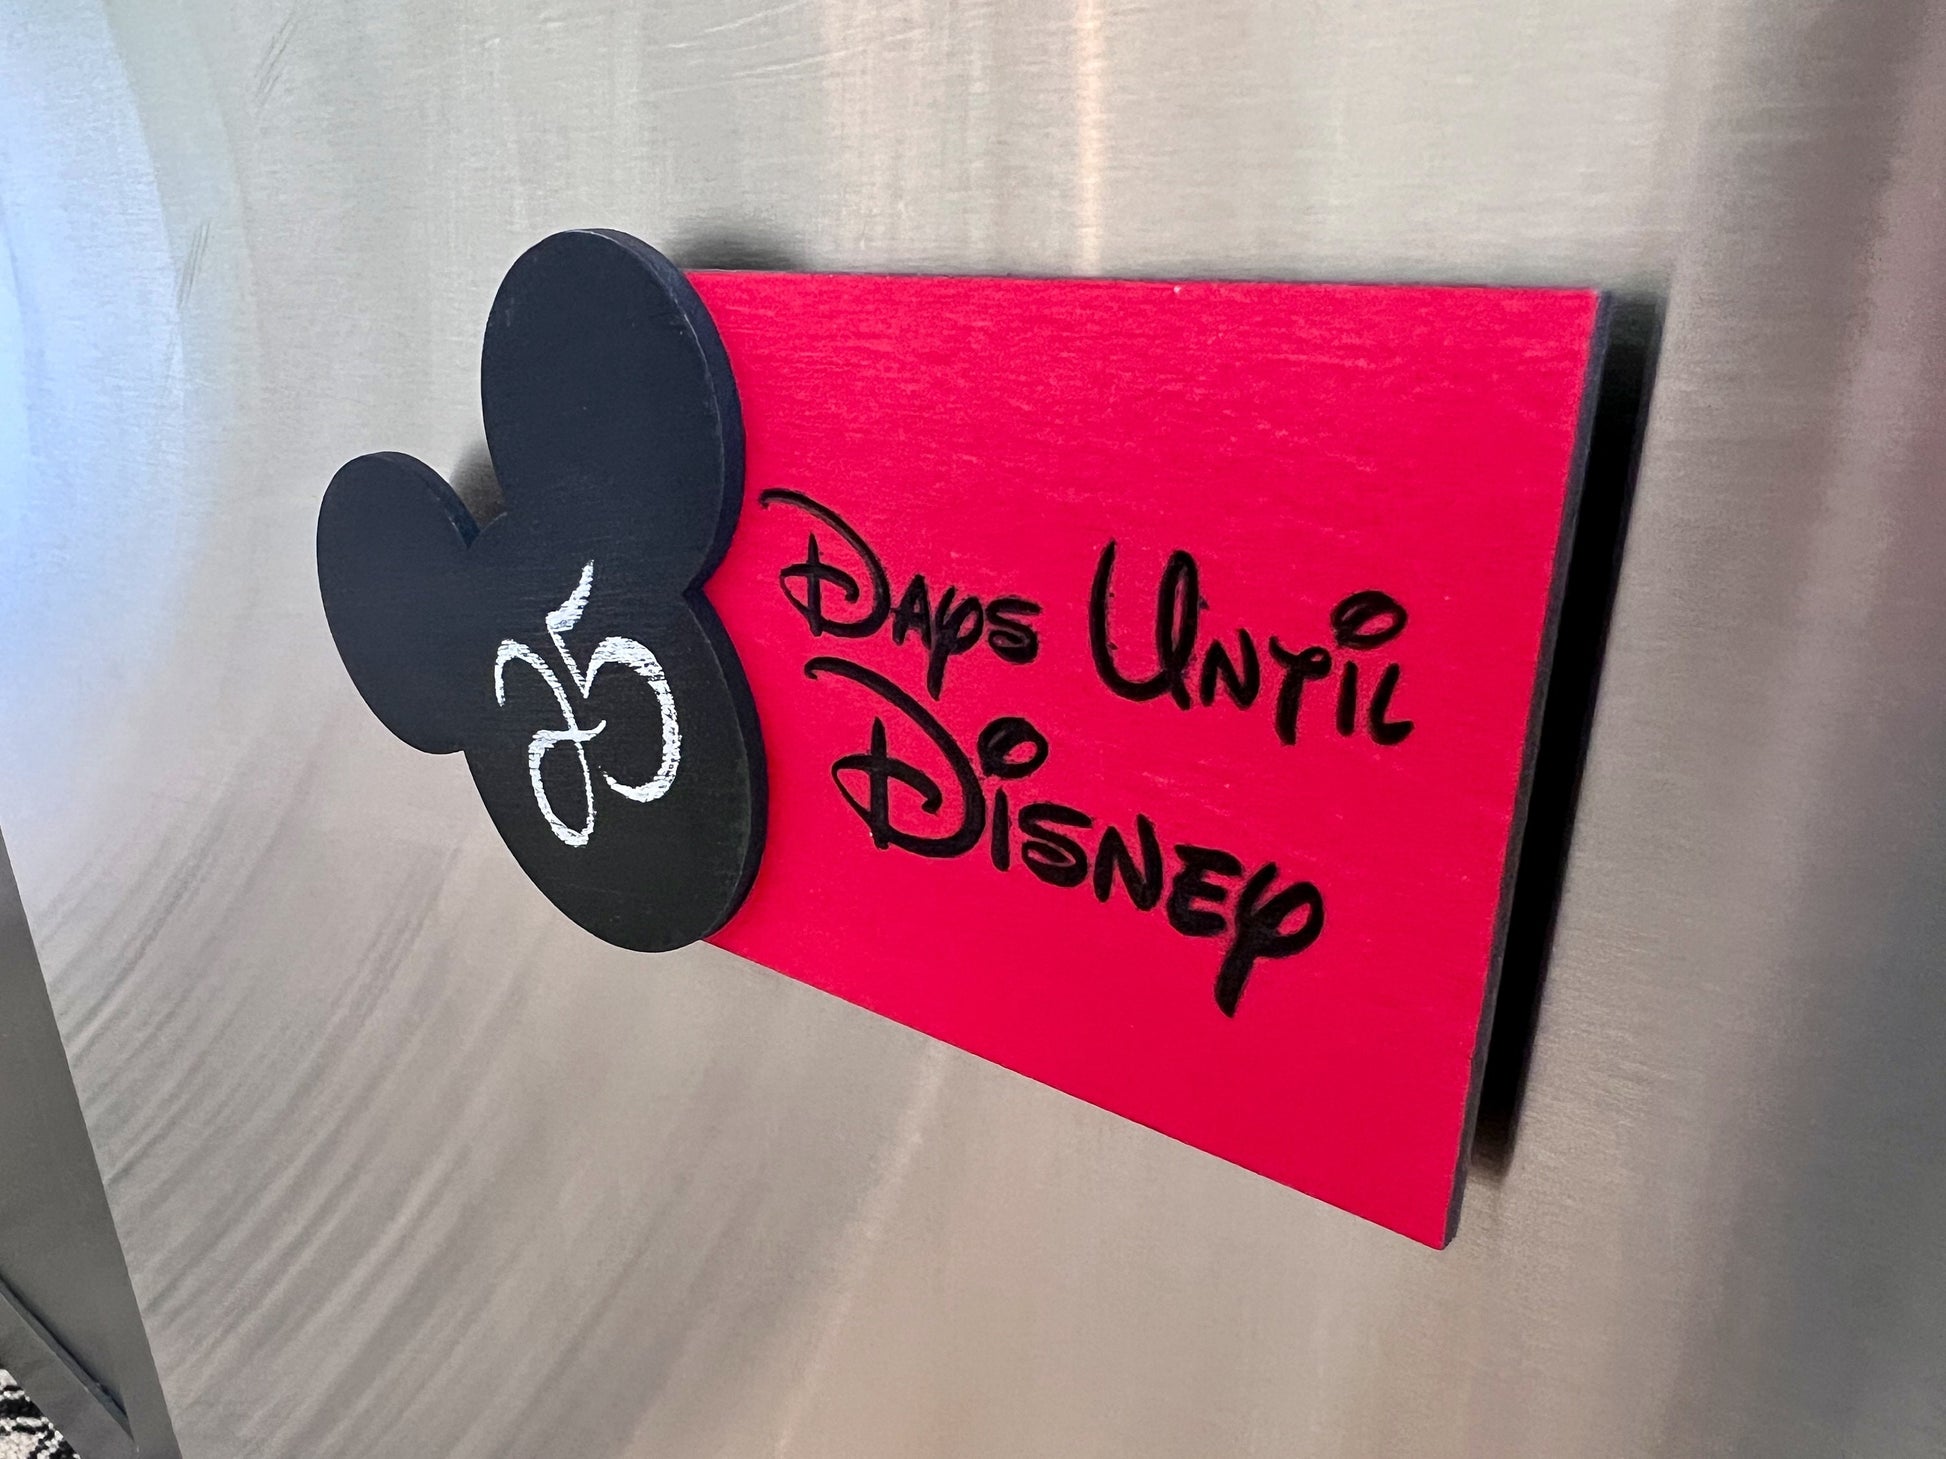 Countdown to Disneyland or Disneyworld Magnet, Countdown the number of days until your Disney Trip with this countdown fridge magnet.